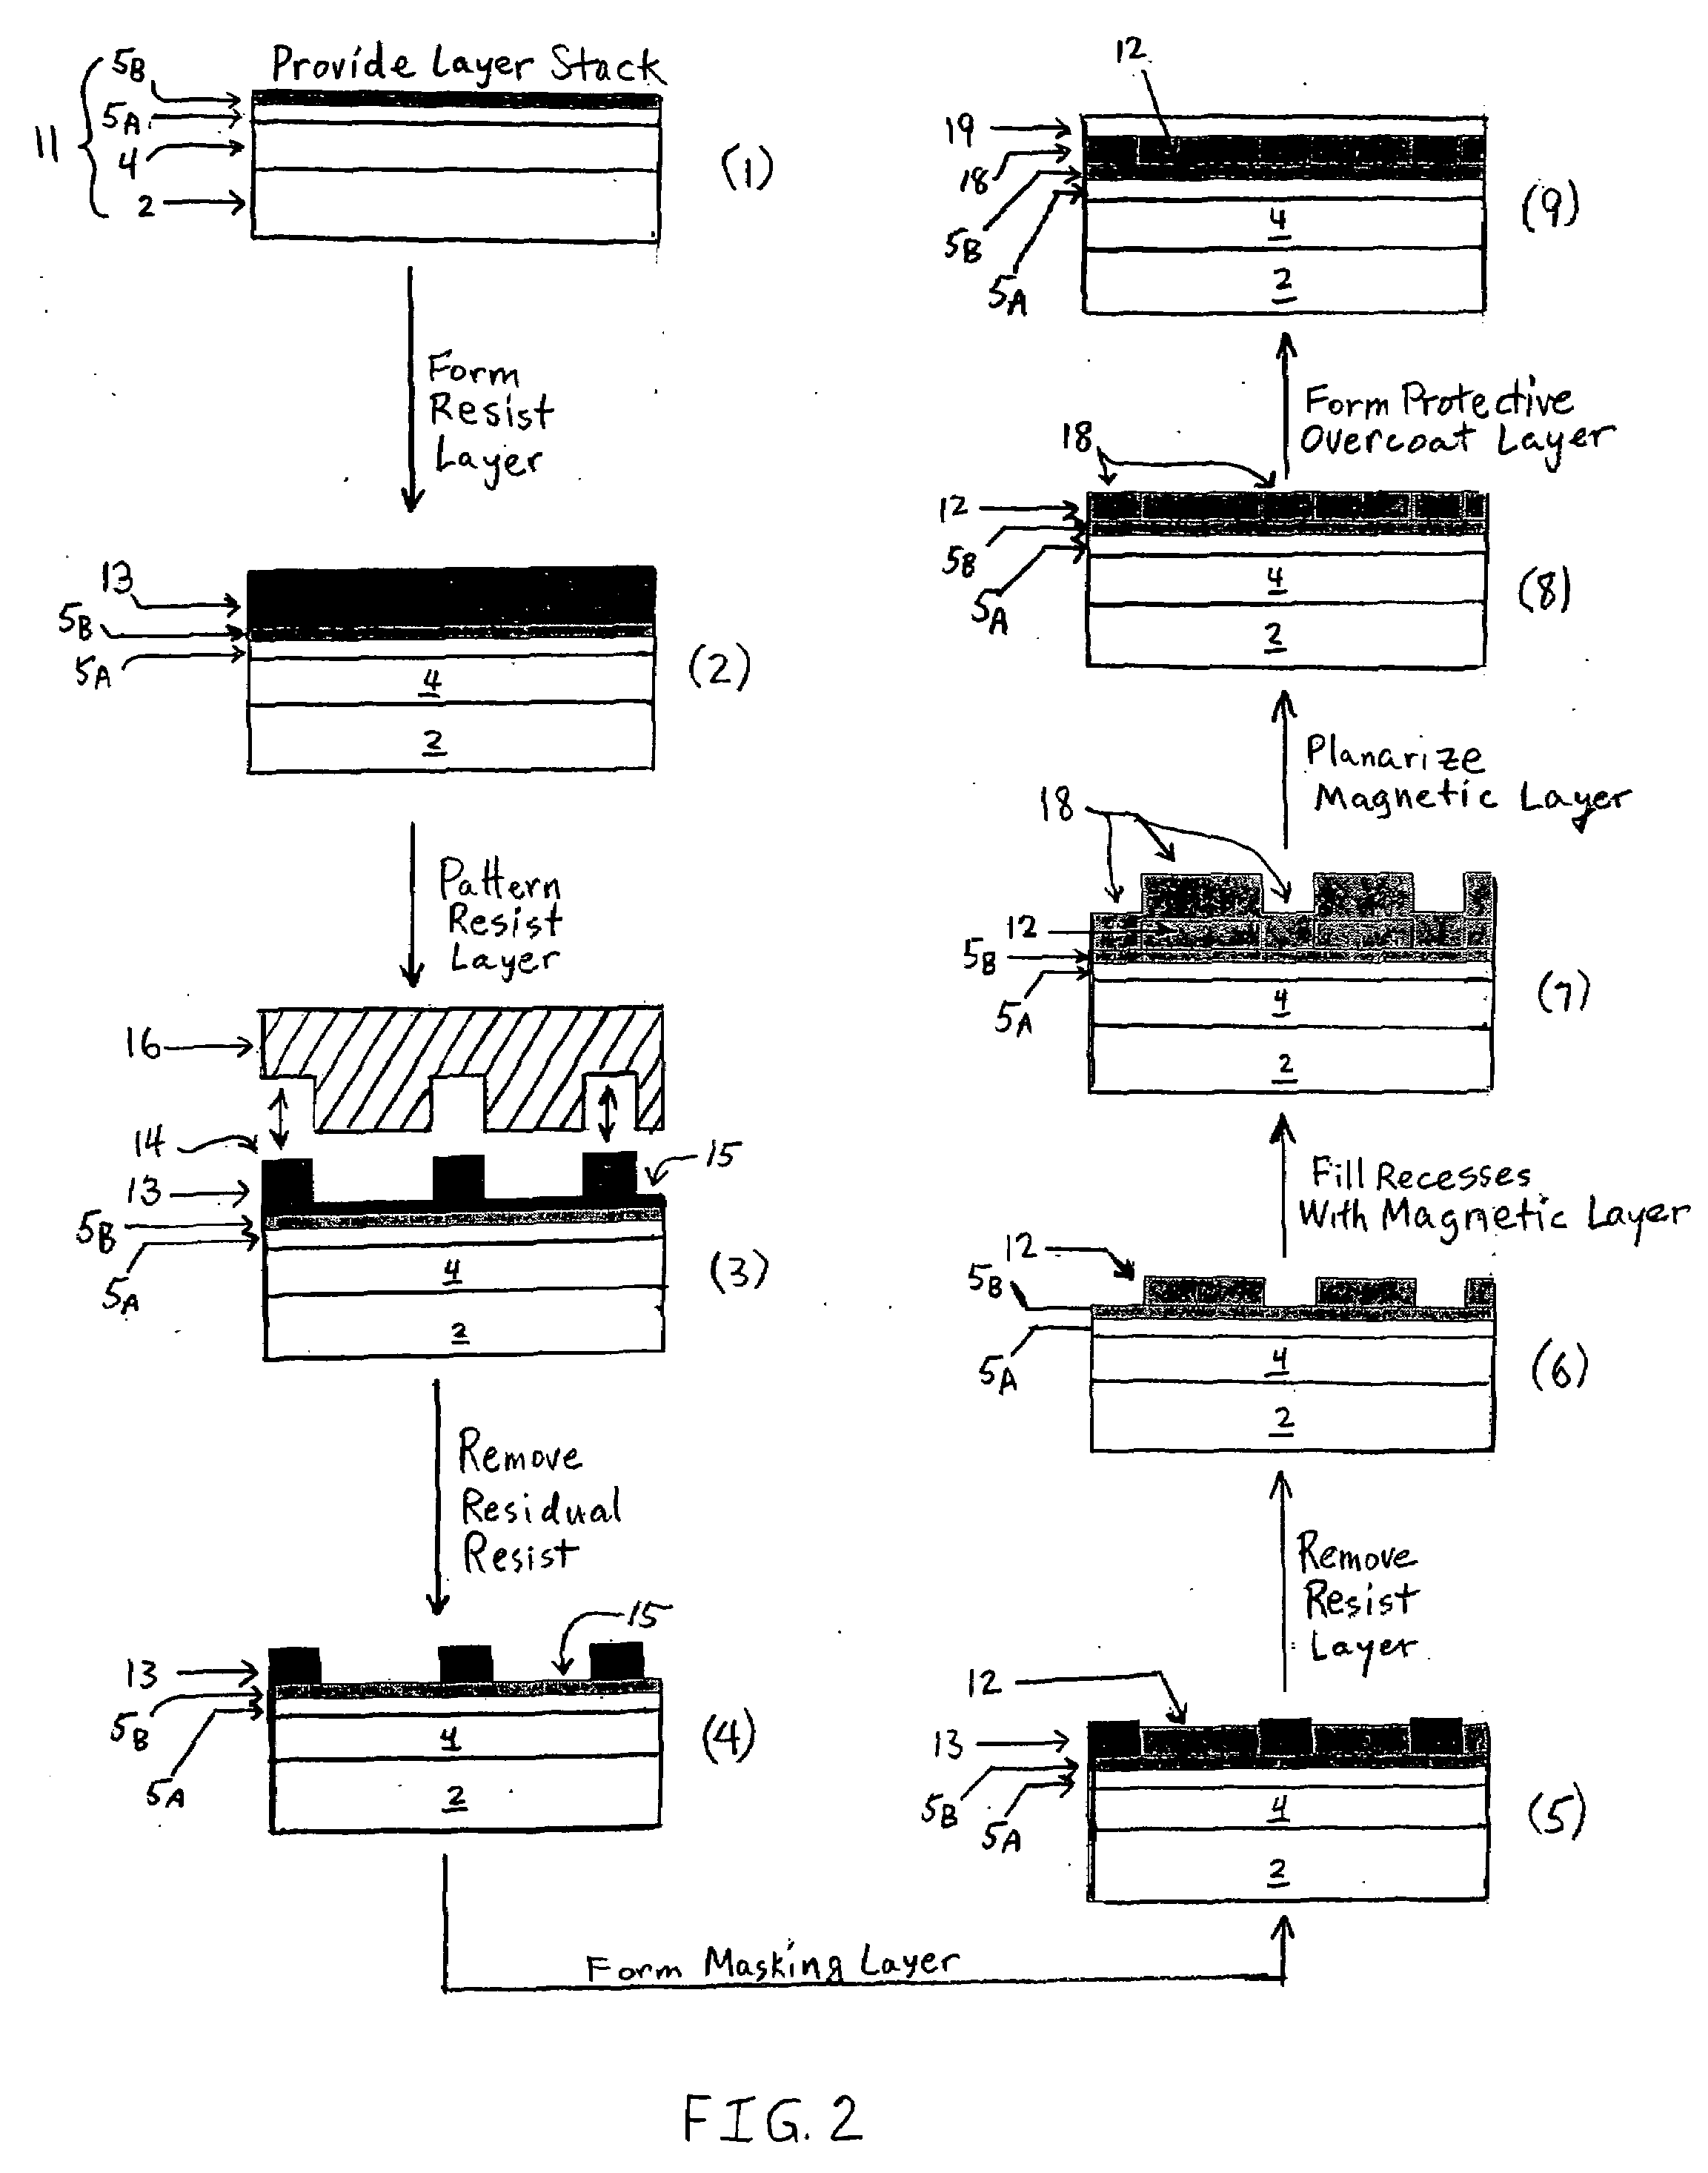 Process for fabricating patterned magnetic recording media